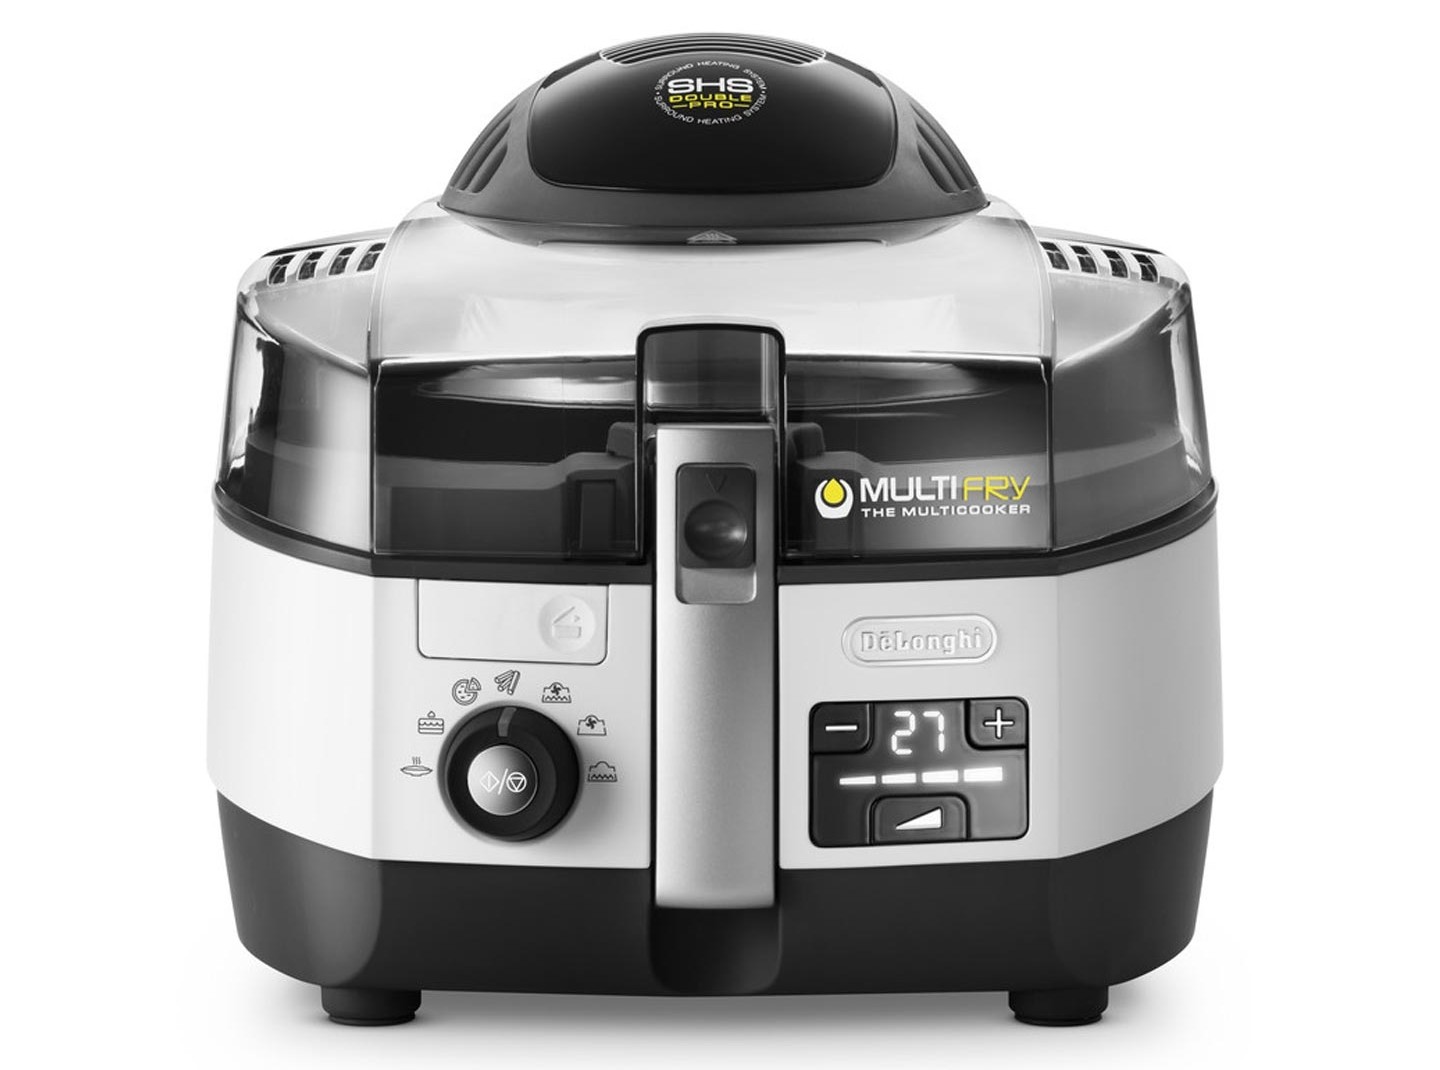 Fritteuse DeLonghi Multifry Extra Chef im Test, Bild 3